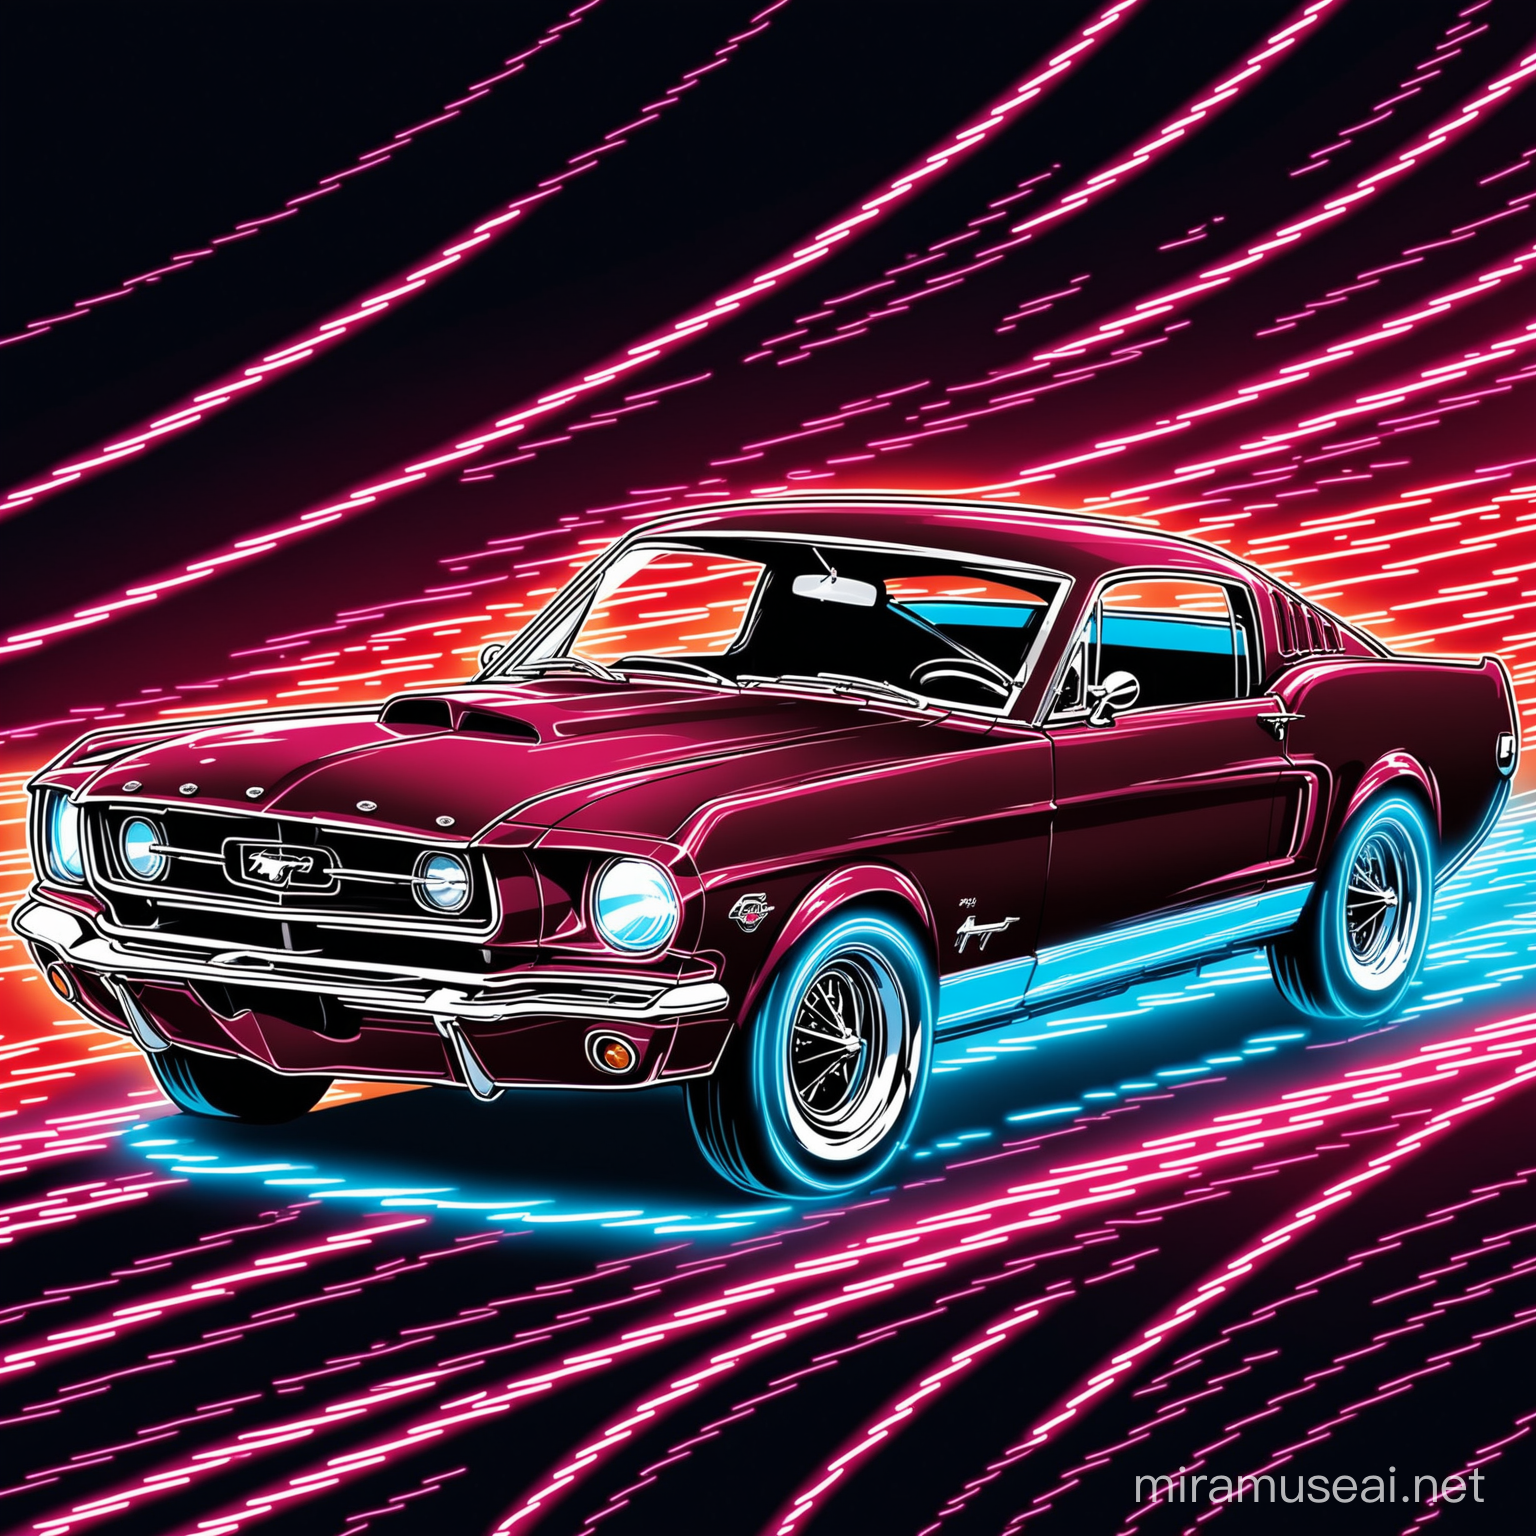 Vintage Red Wine Ford Mustang Racing with Neon Speed Lines